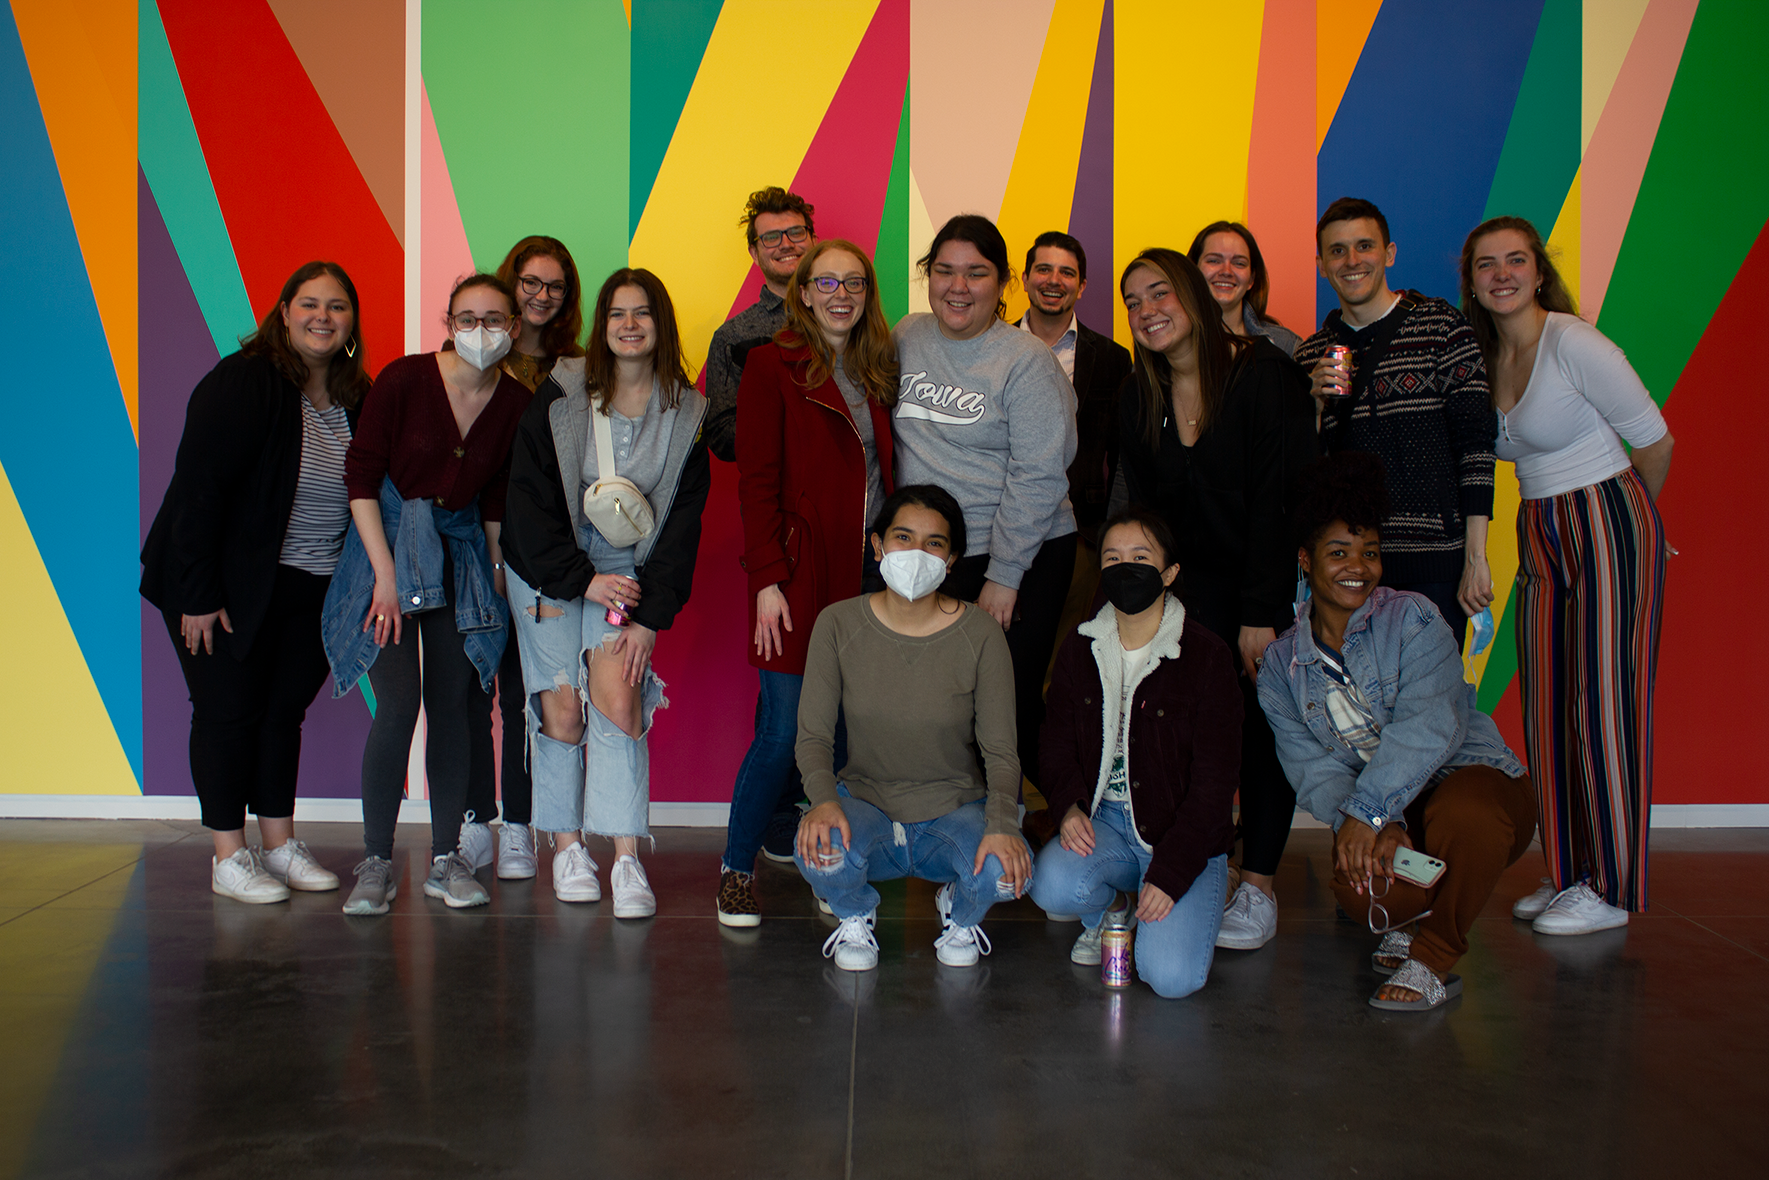 A group photo of students in the Stanley Museum of Art lobby, standing in front of a colorful mural by artist Odili Donald Odita.